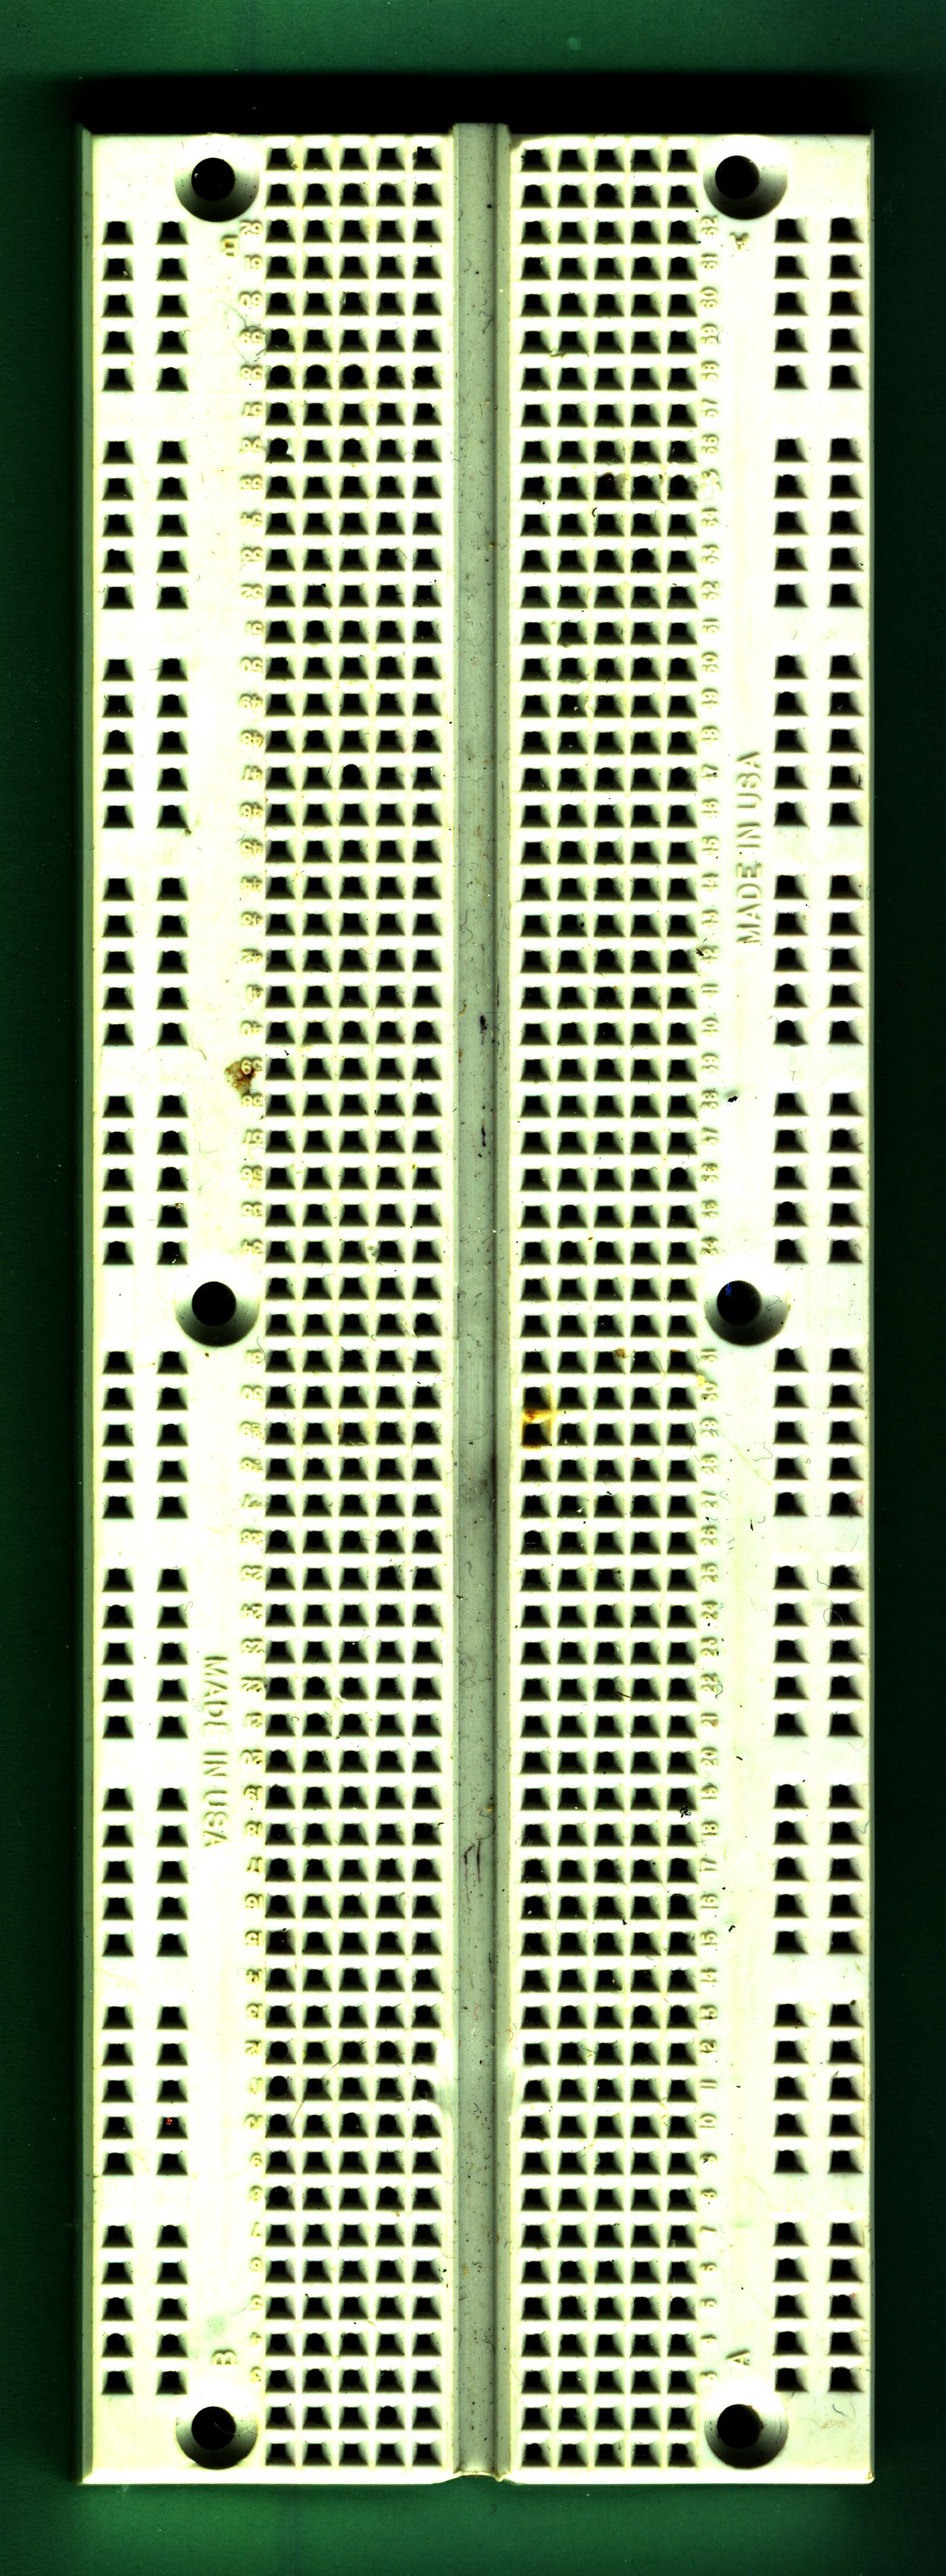 back view of a breadboard